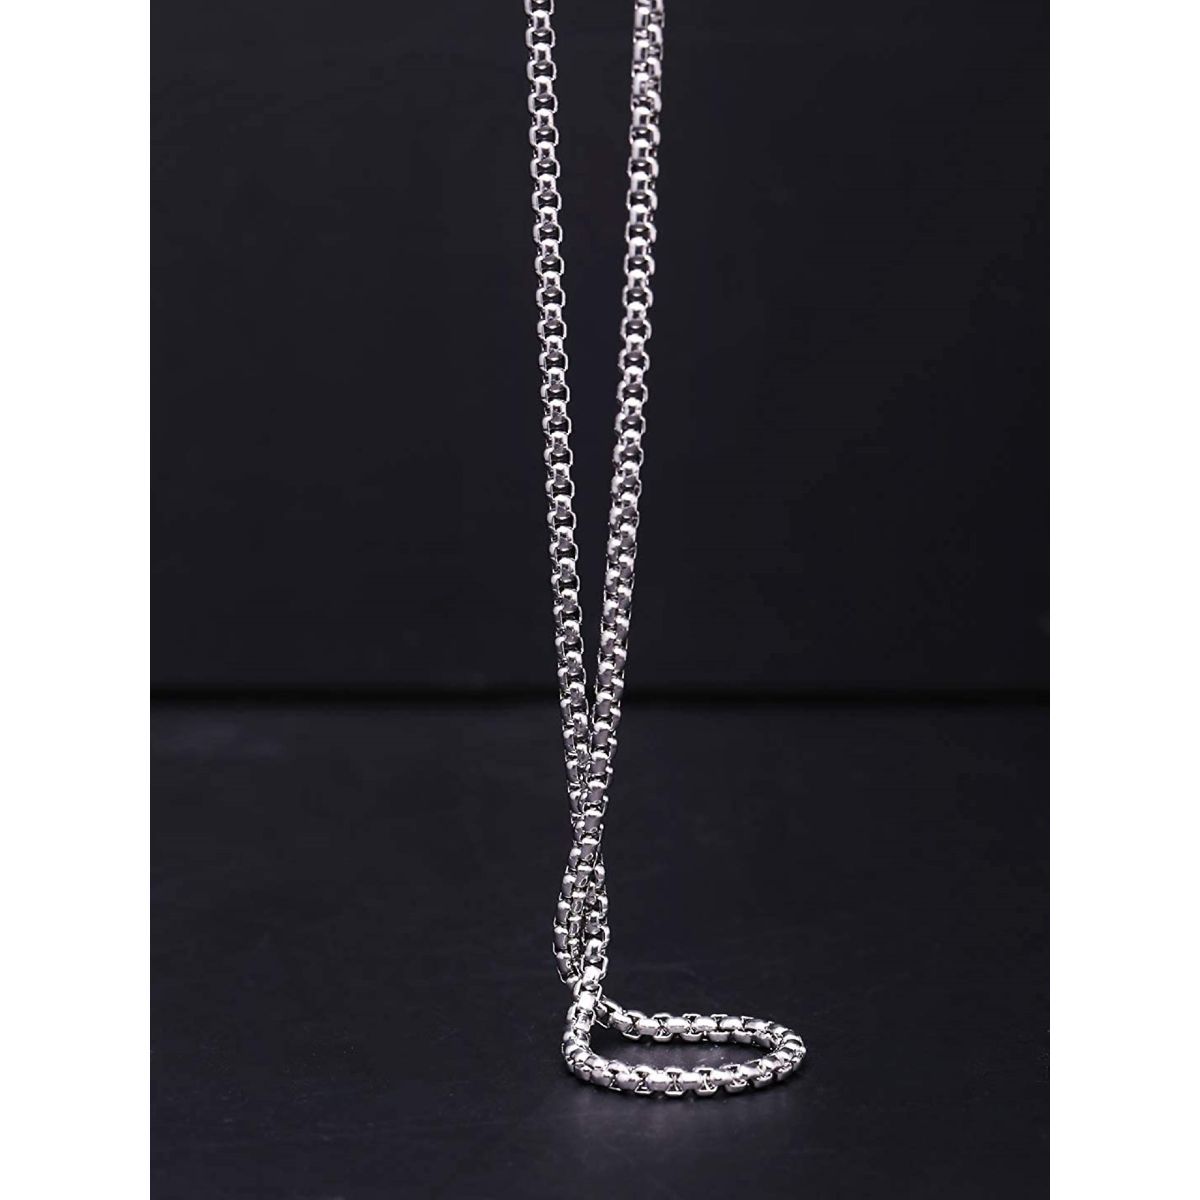 Buy OOMPH Silver Tone Box Chain Stainless Steel Neck Chain for Men and Boys  Online